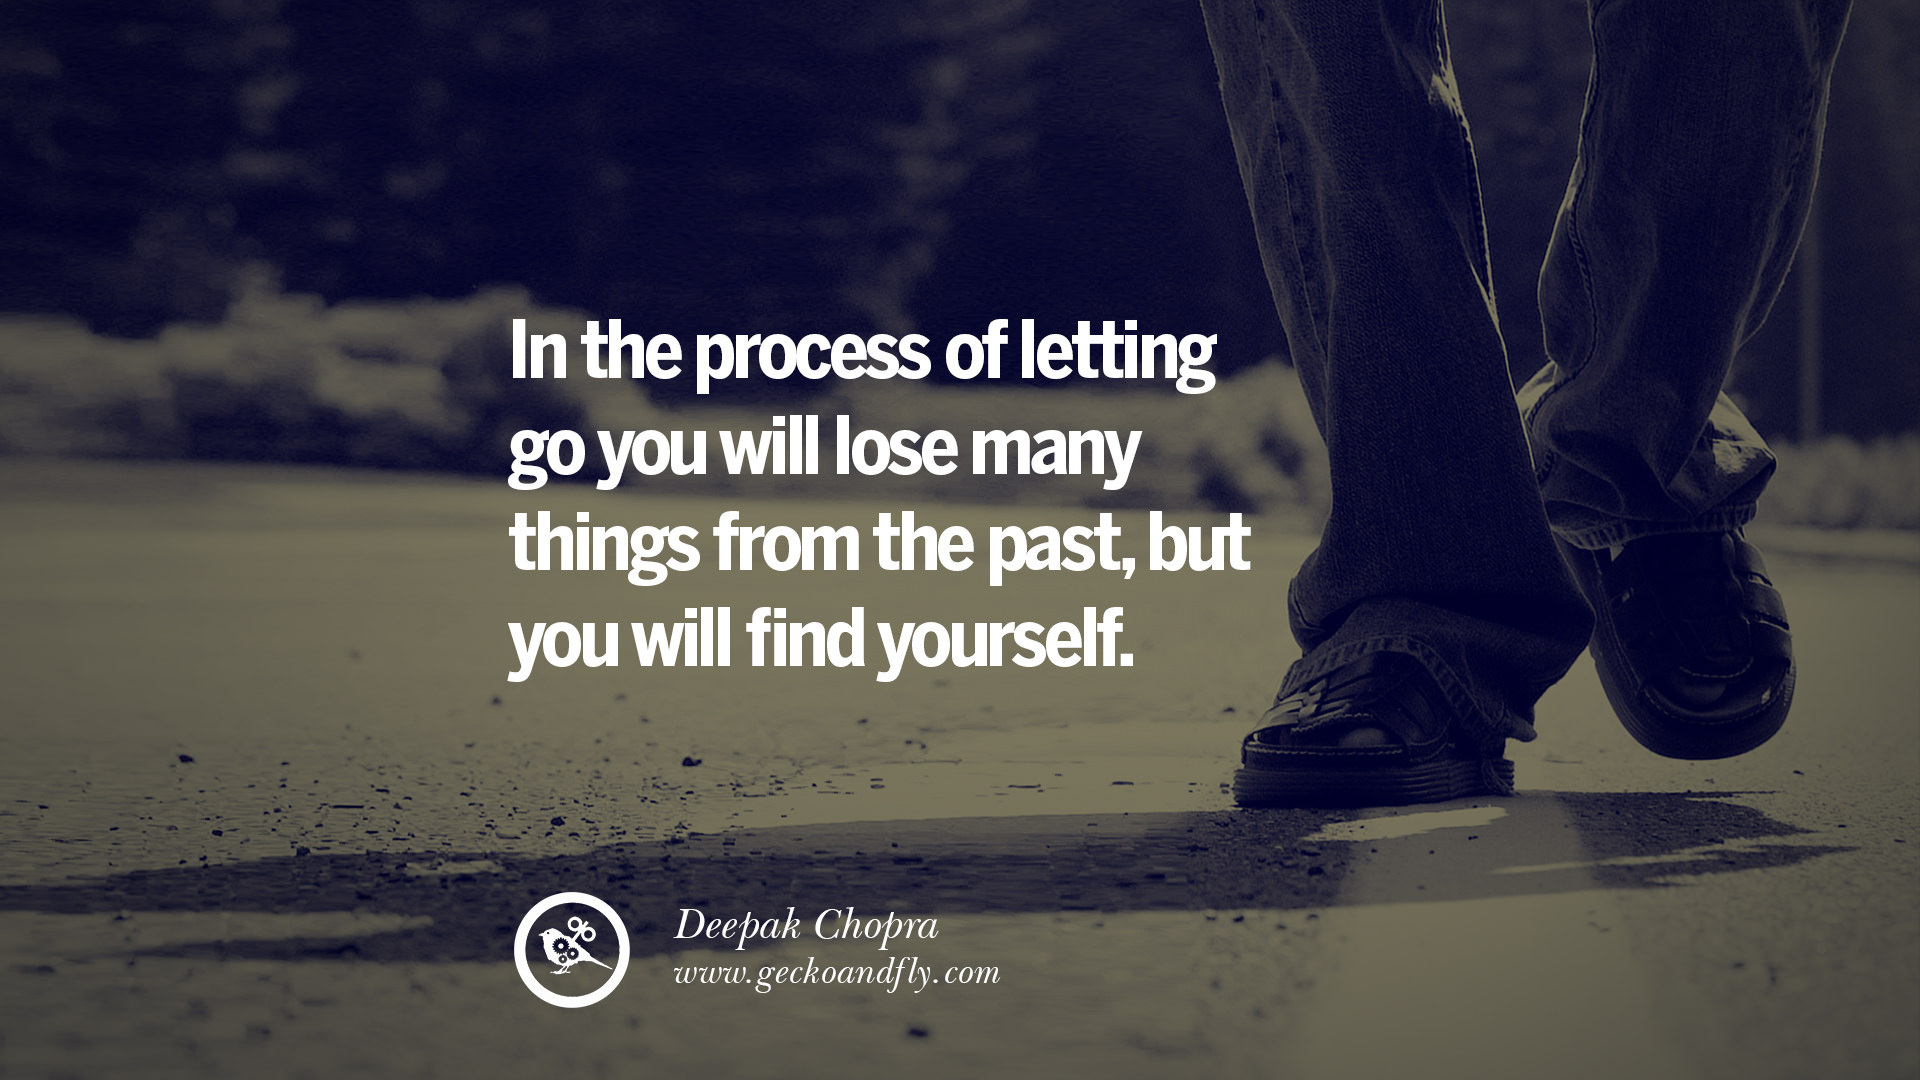 Letting go quote